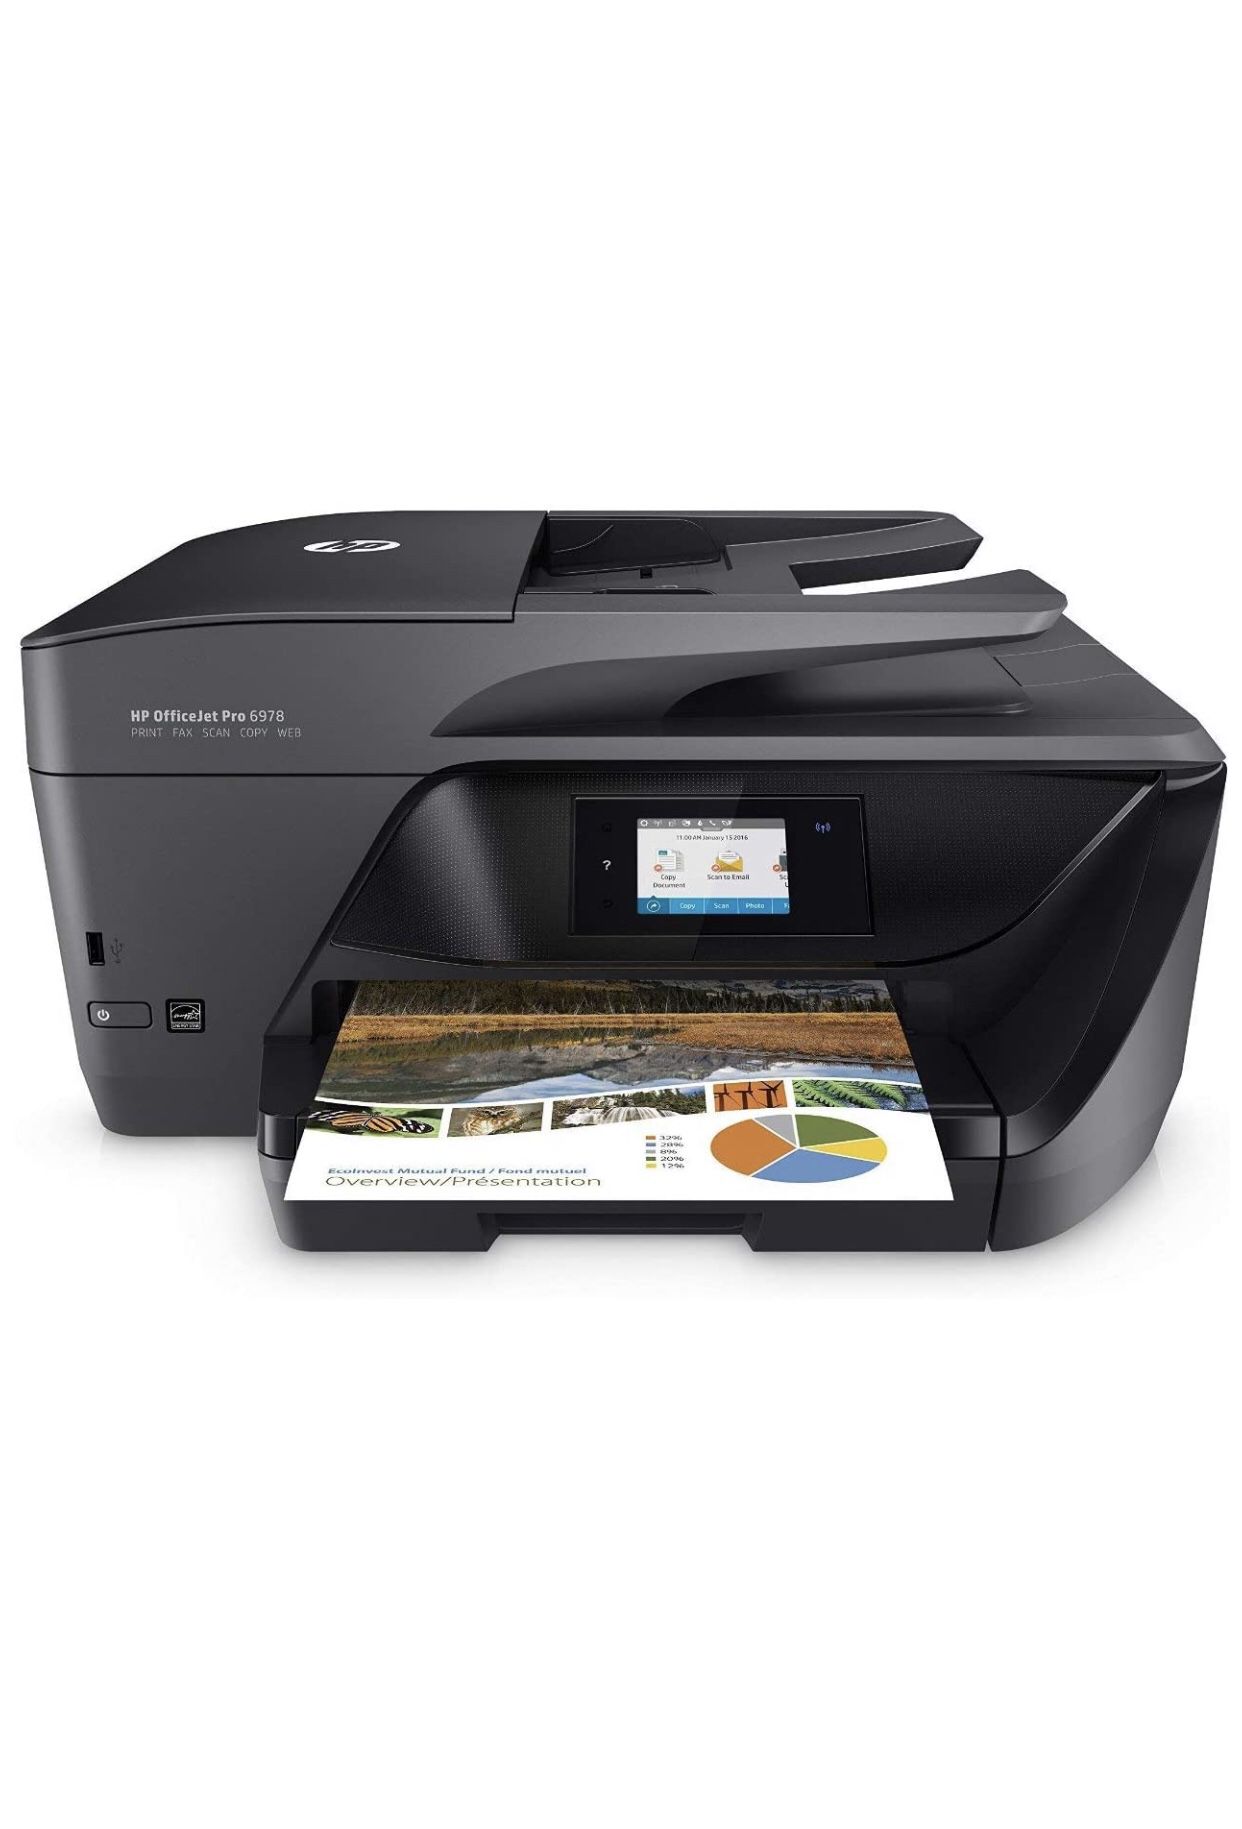 HP OfficeJet Pro 6978 All-in-One Wireless Printer, HP Instant Ink